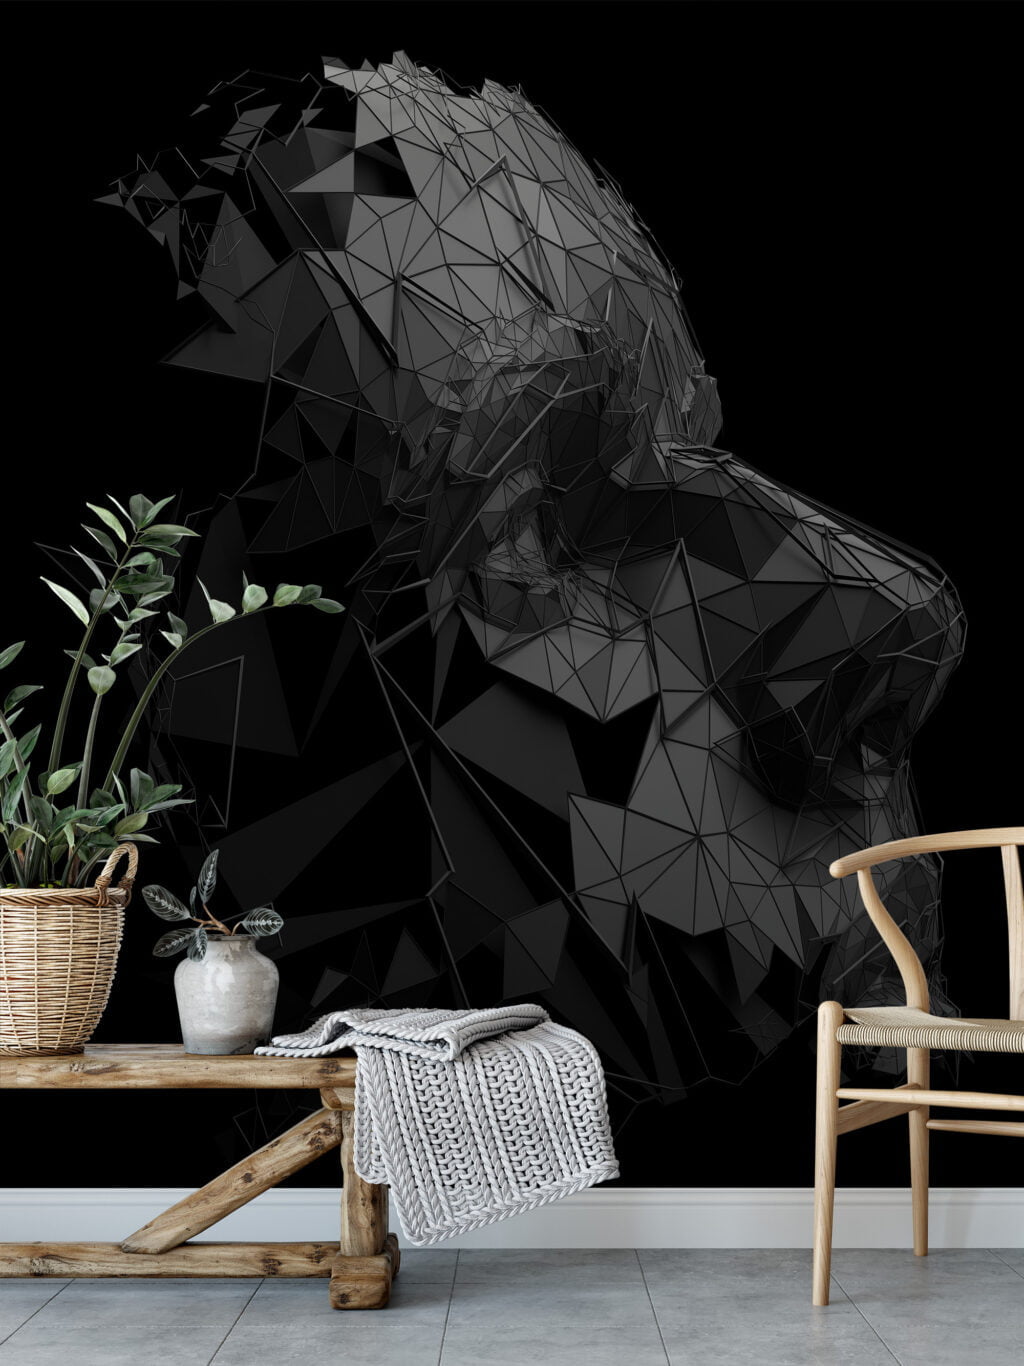 Dark Polygonal Face Structure Wallpaper with Self-Adhesive Backing, Customizable Sizes, and Removable & Reusable Properties for Modern Wall Decor